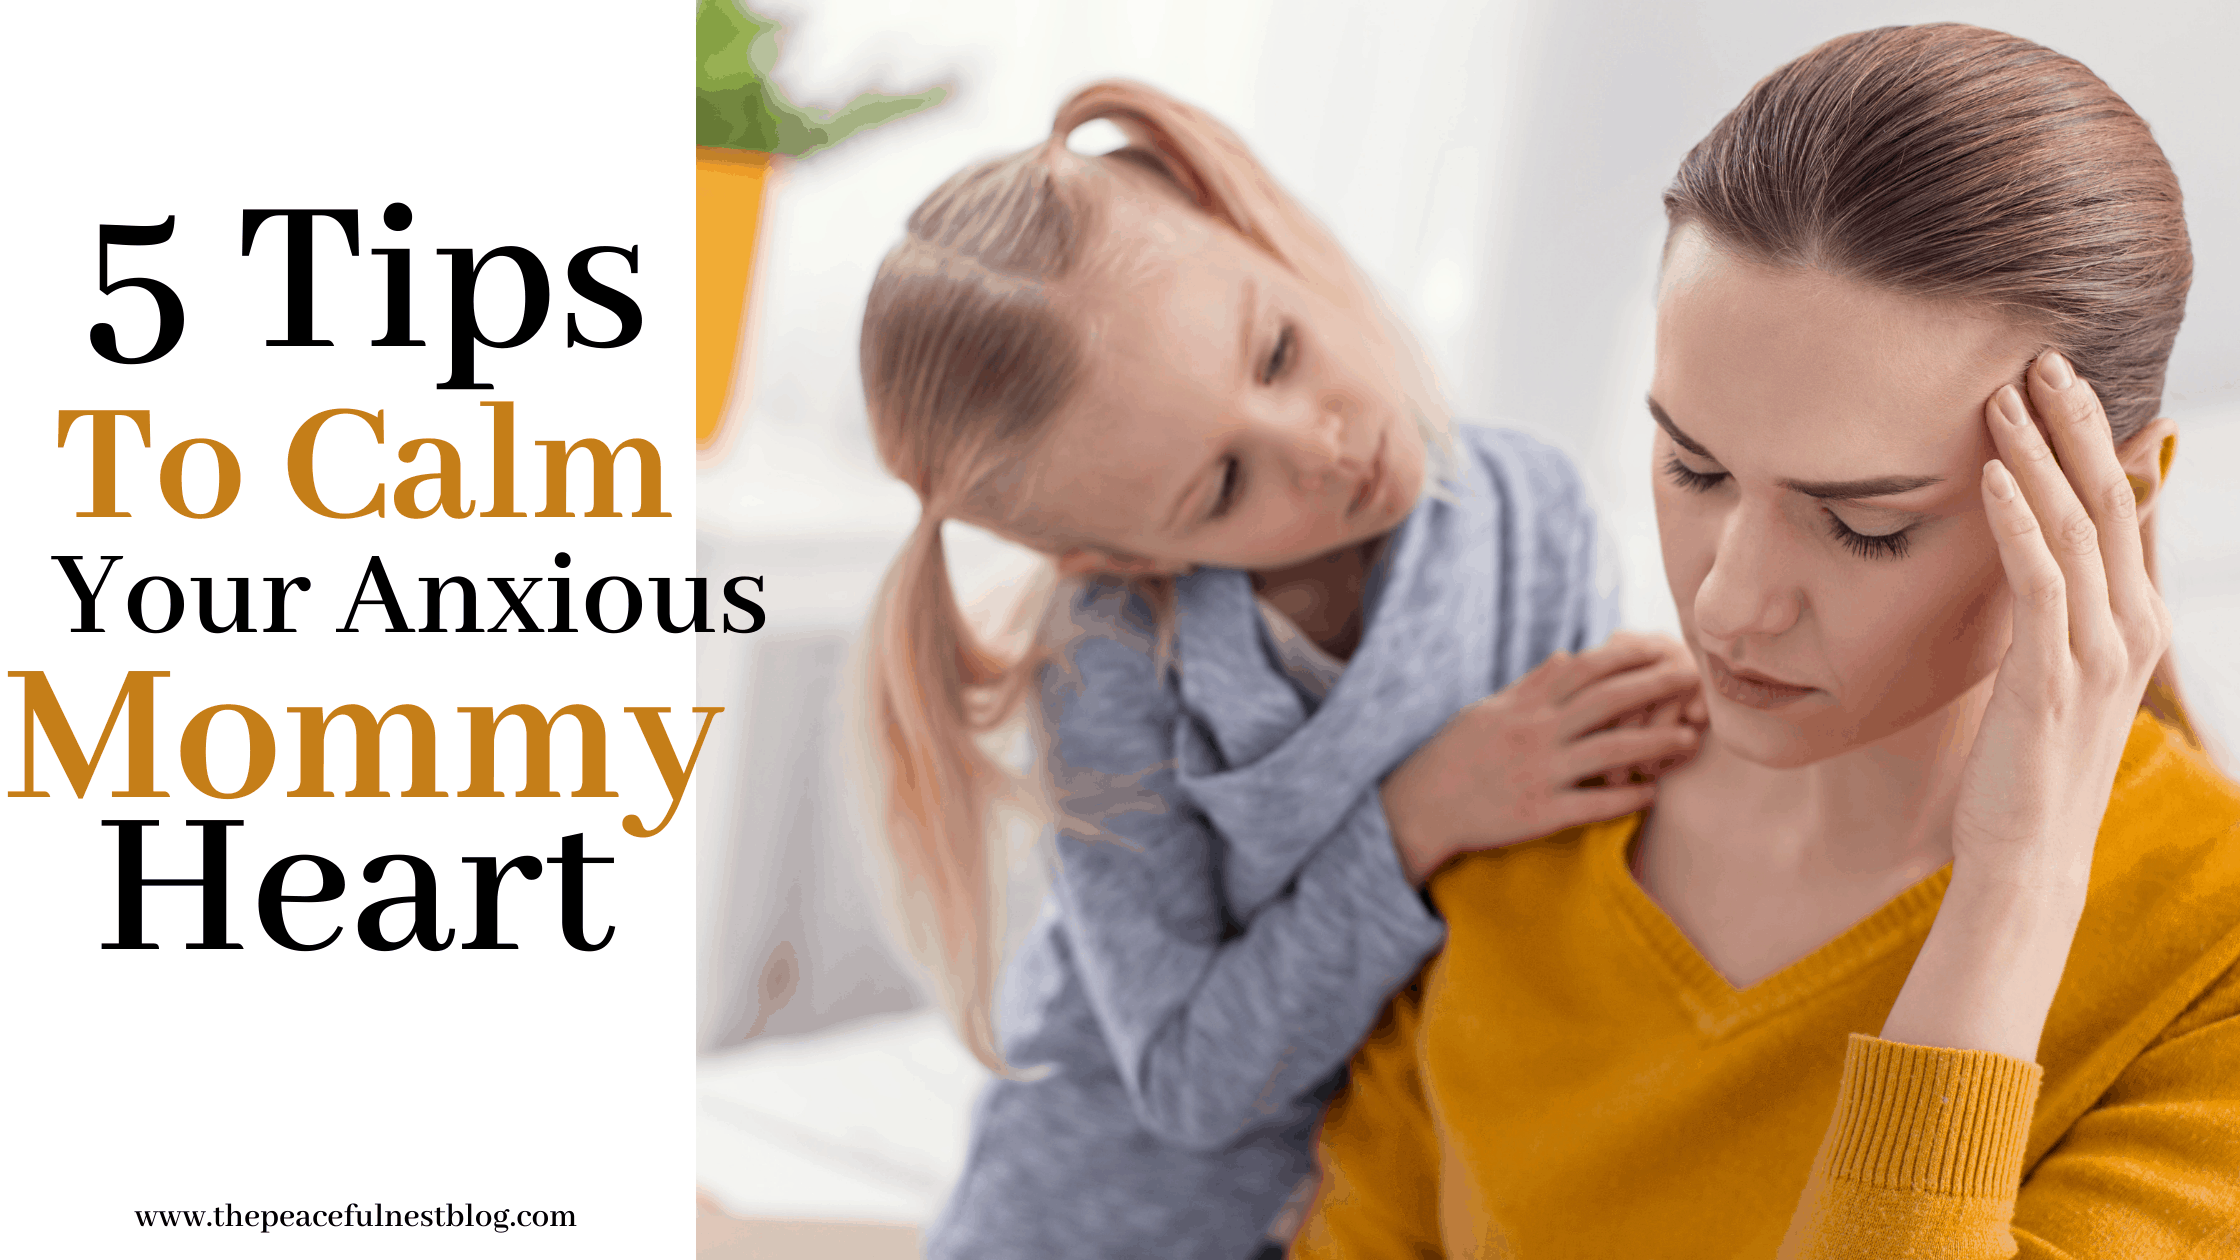 5 Tips For Your Anxious Mommy Heart